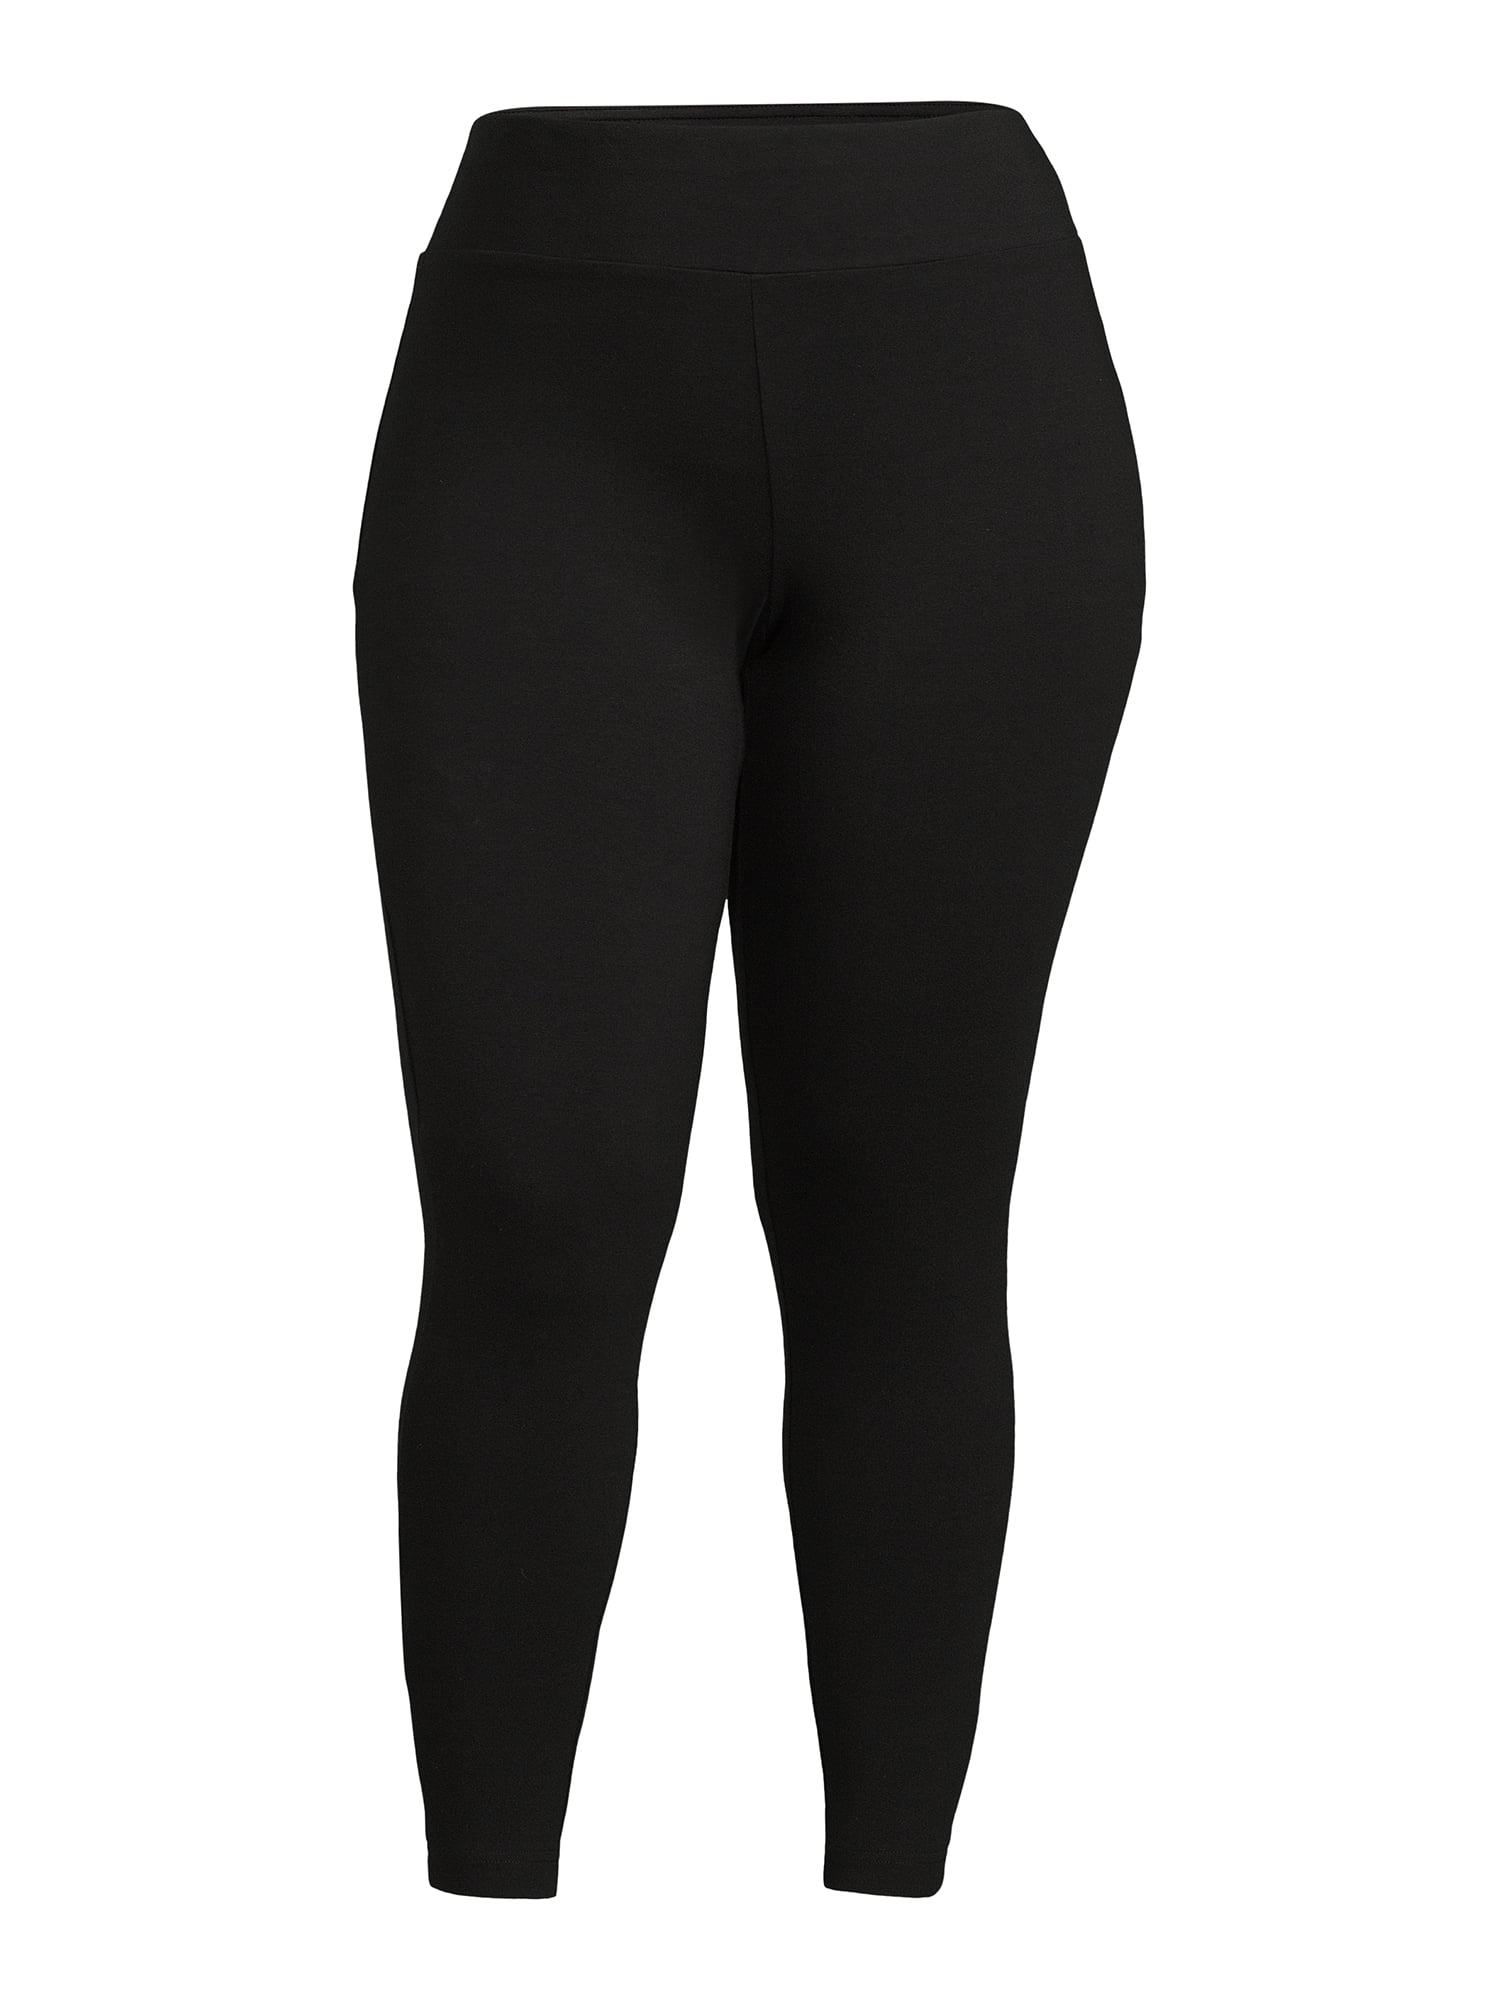 Terra & Sky Black High Rise Fitted Plus Size Full Length Legging - 0X (14W)  New - Helia Beer Co